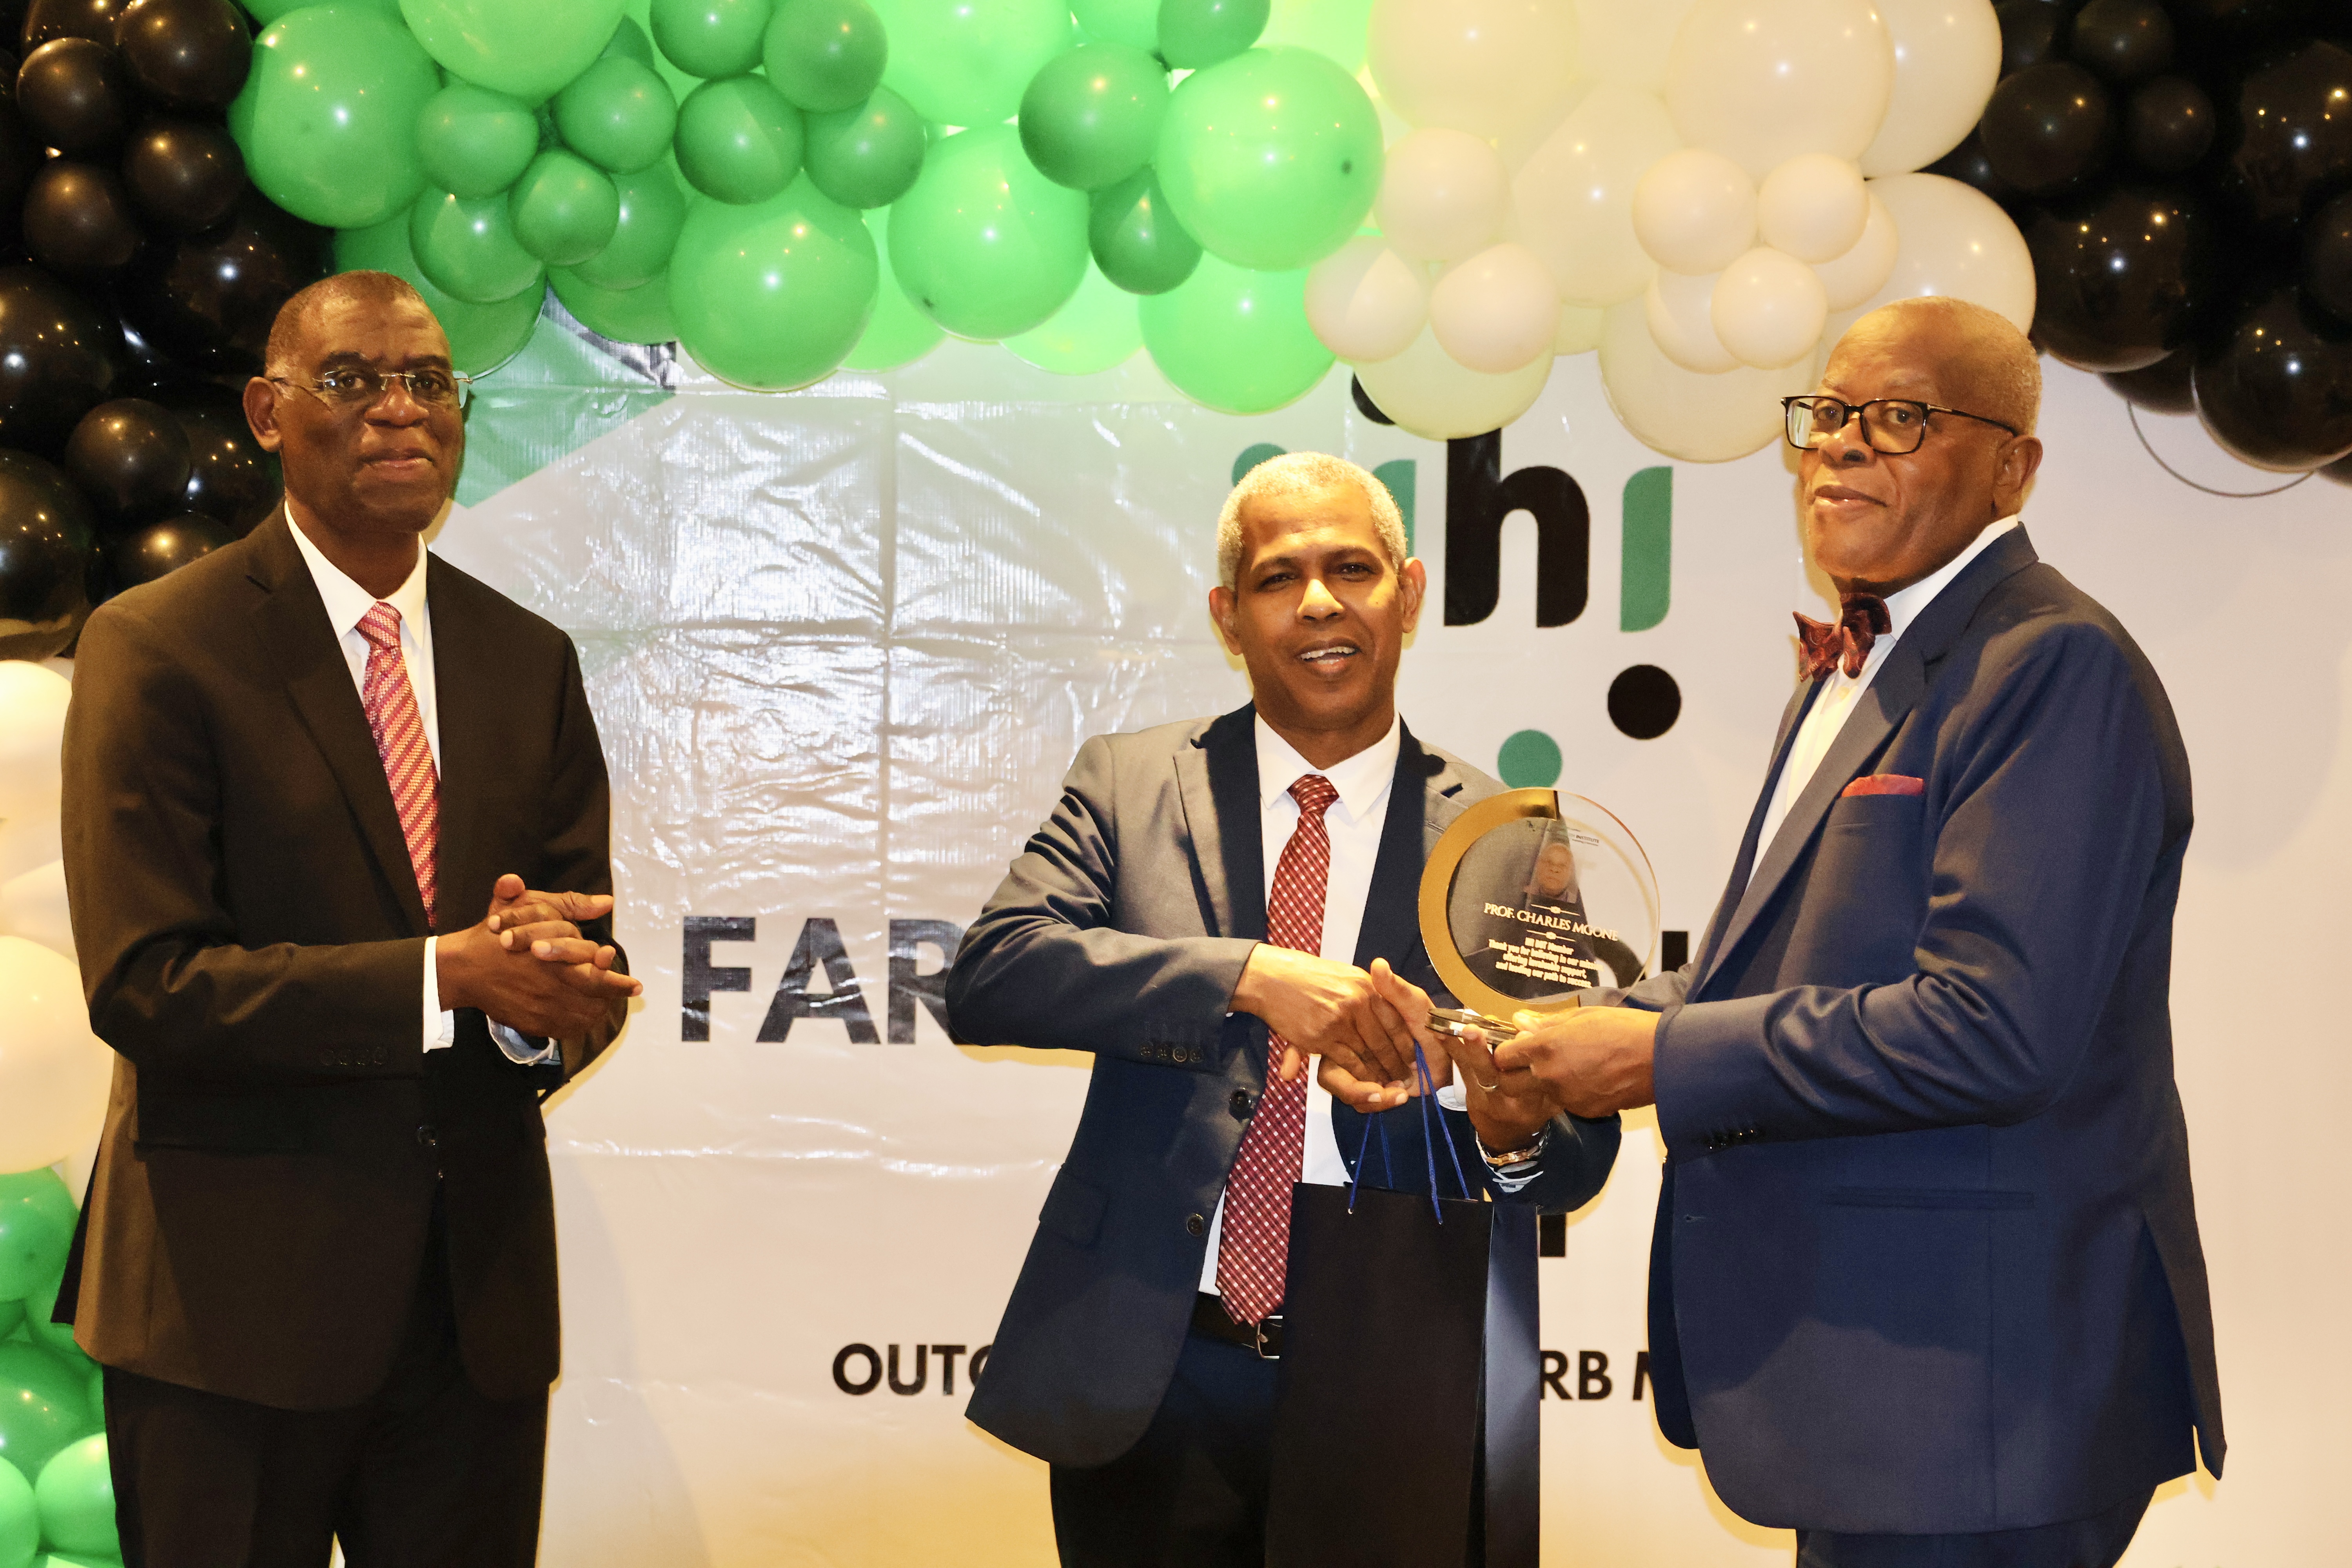 FAREWELL: Honouring outgoing top governing team members